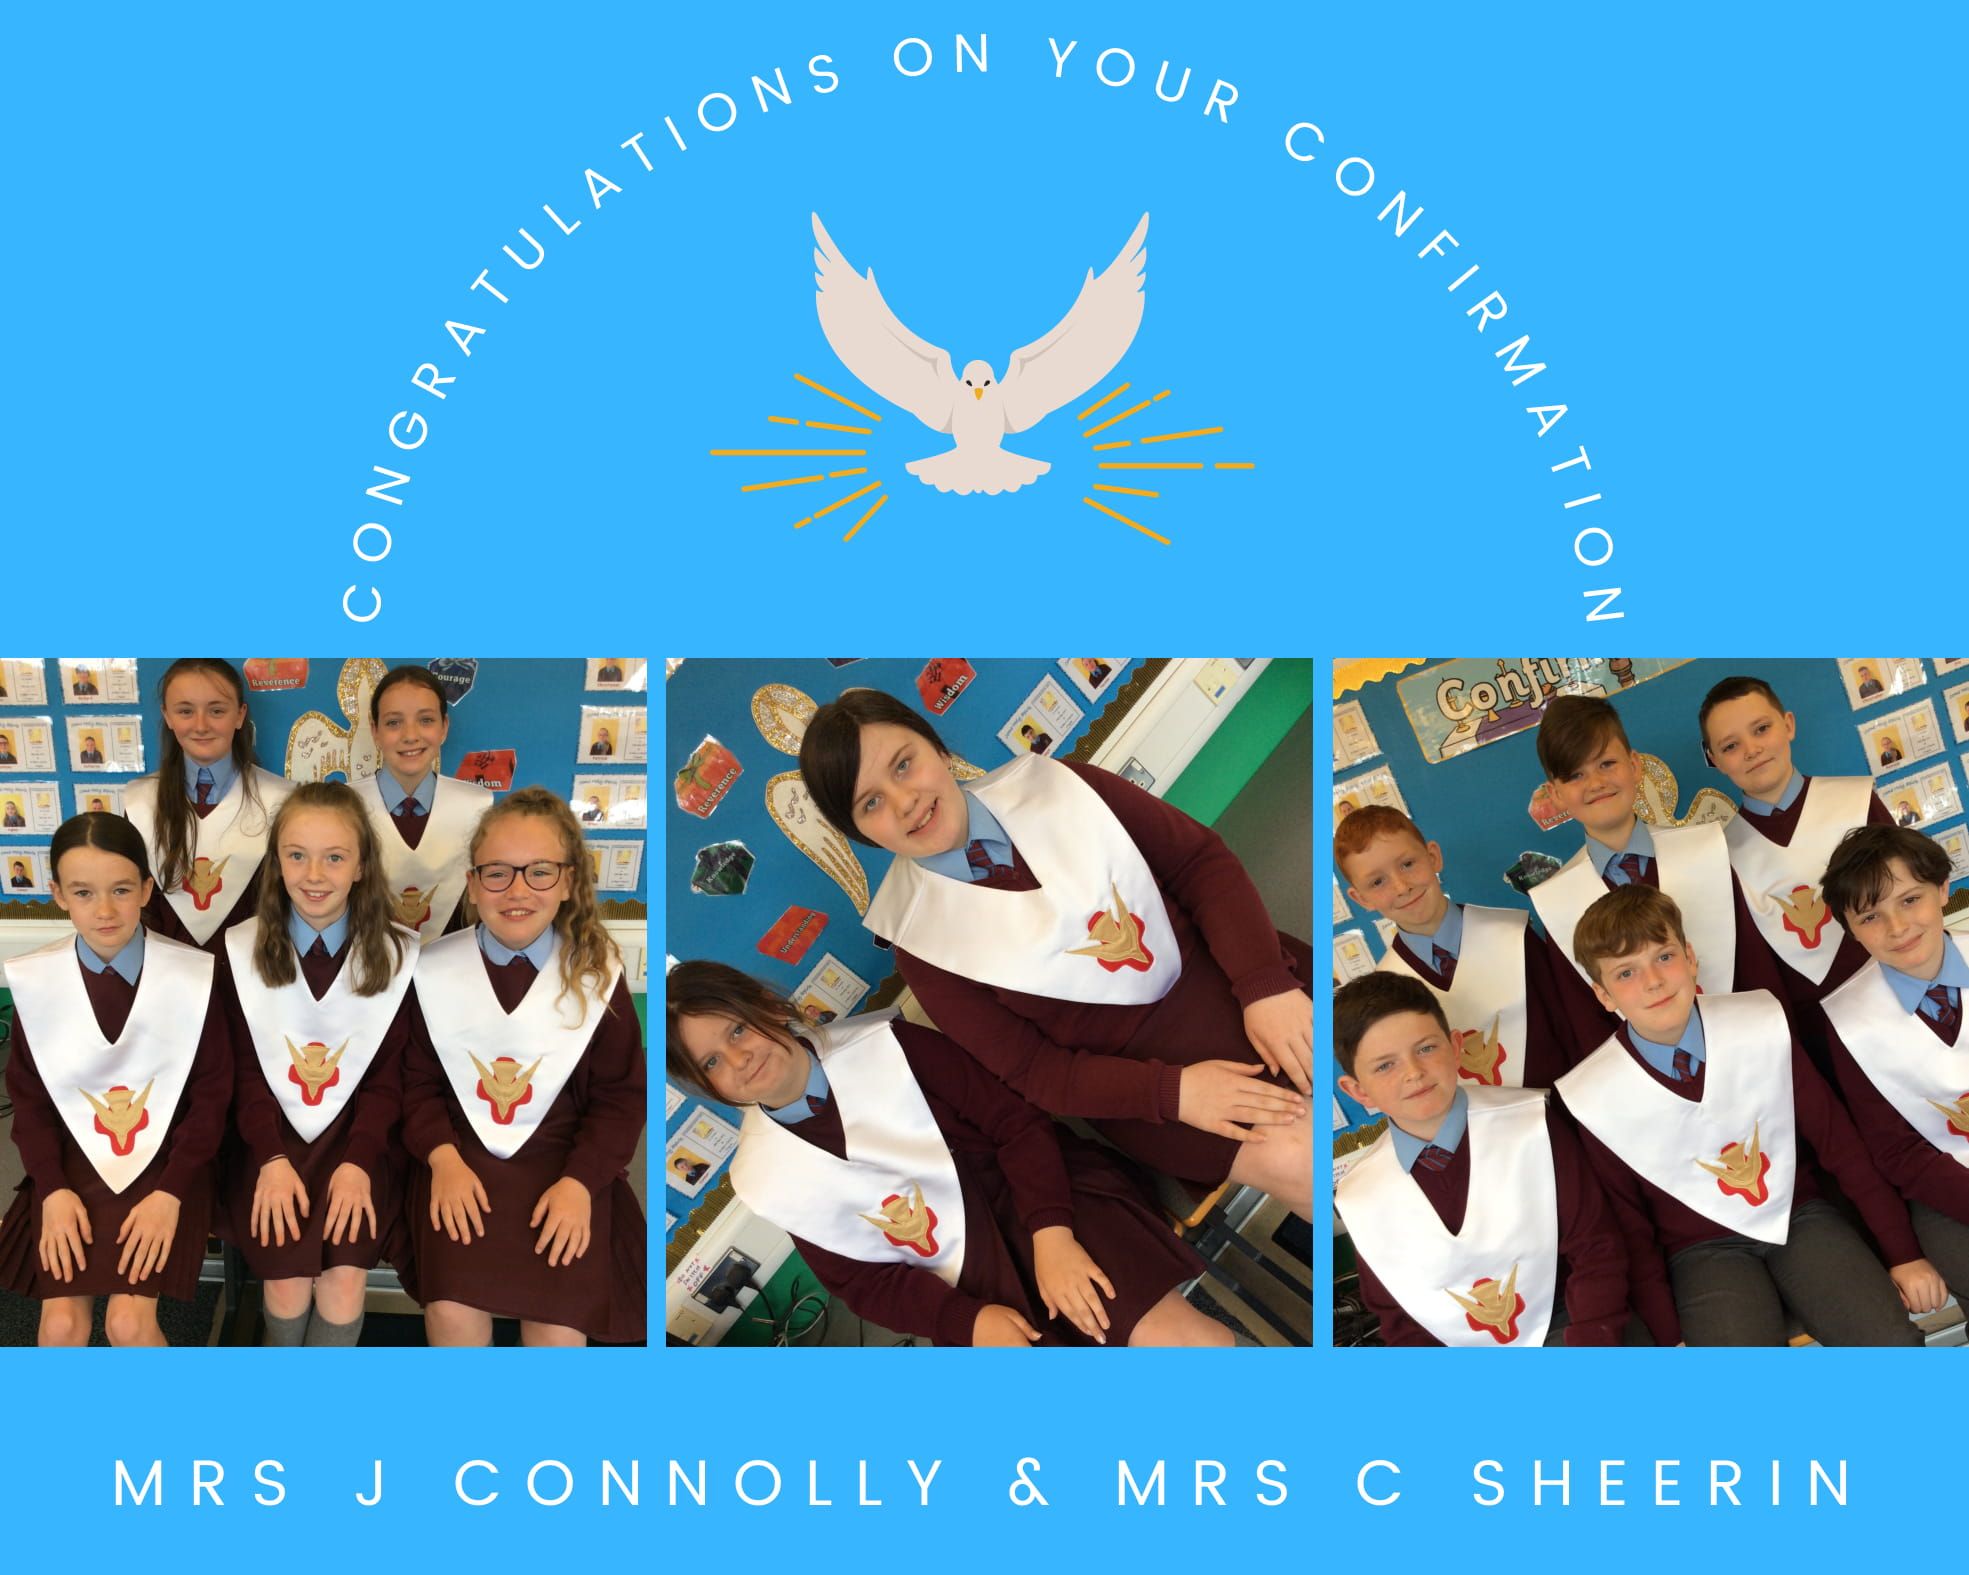 Mrs J Connolly's Confirmation Class